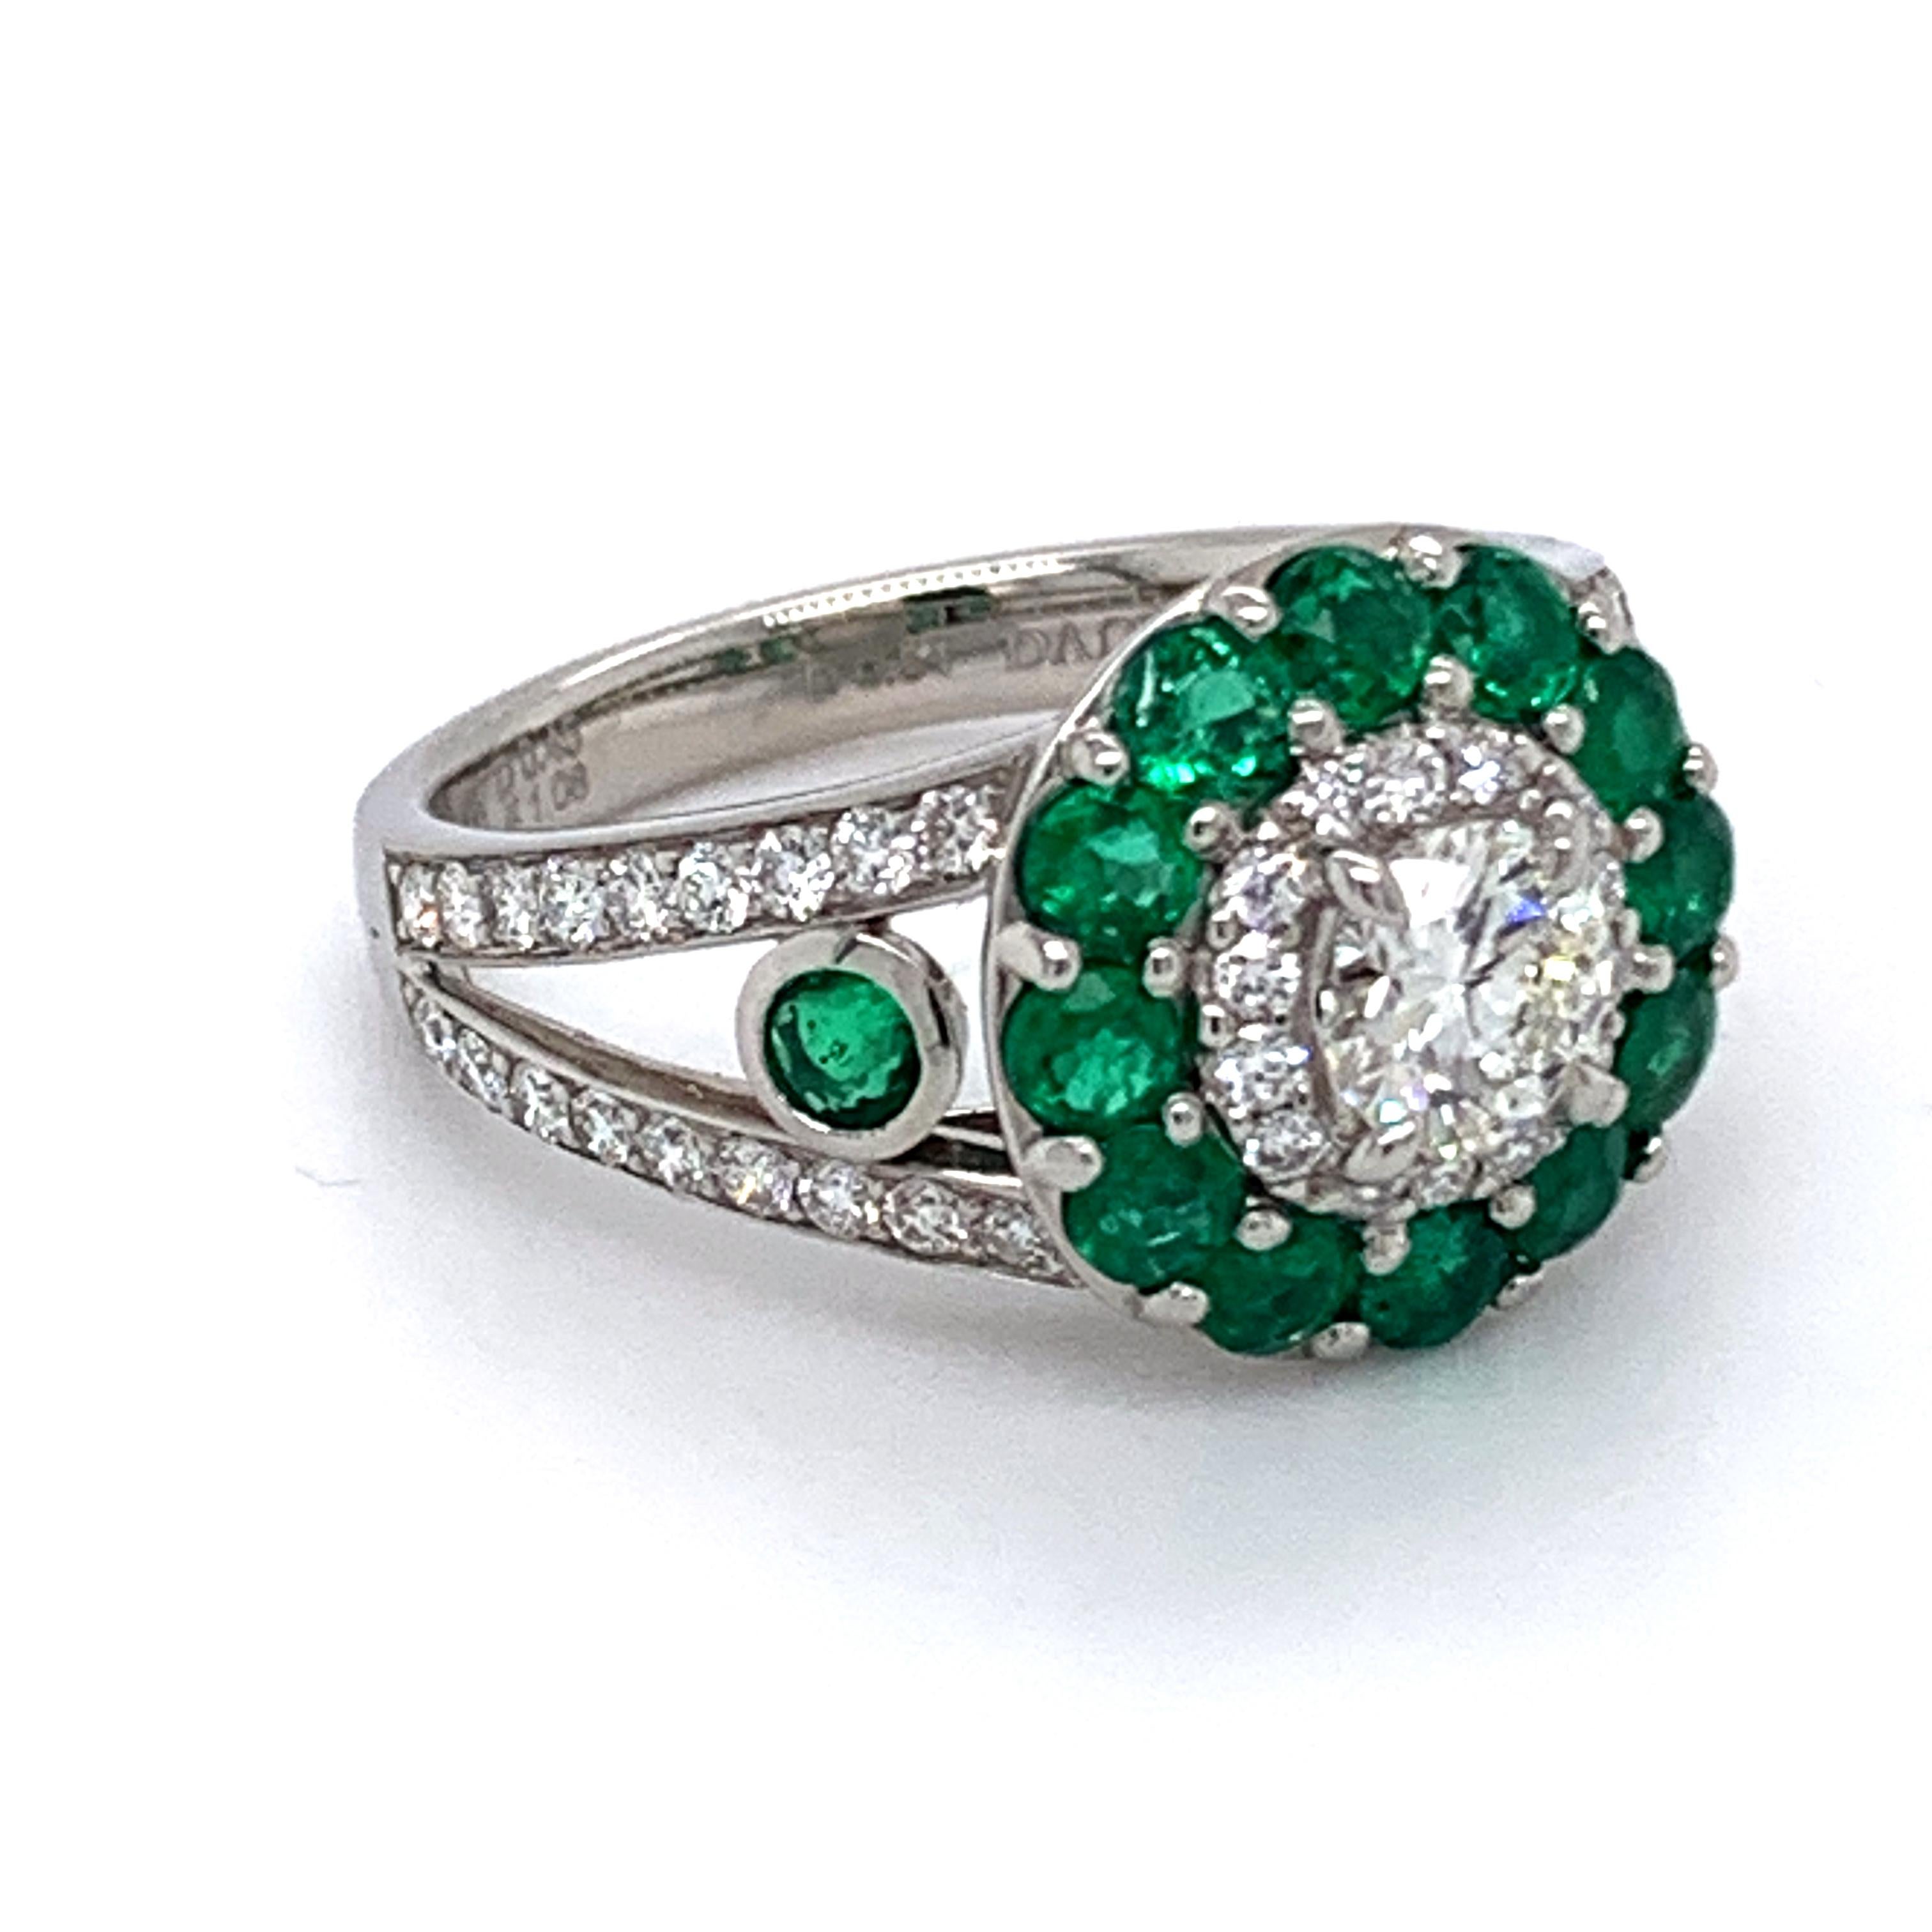 Solid Platinum ring one of the kind designed by Danuta set with diamond center .54 carat total weight G color VS1 clarity surrounded by 
emeralds of 1.08 carat and pave diamonds .45 carats total weight